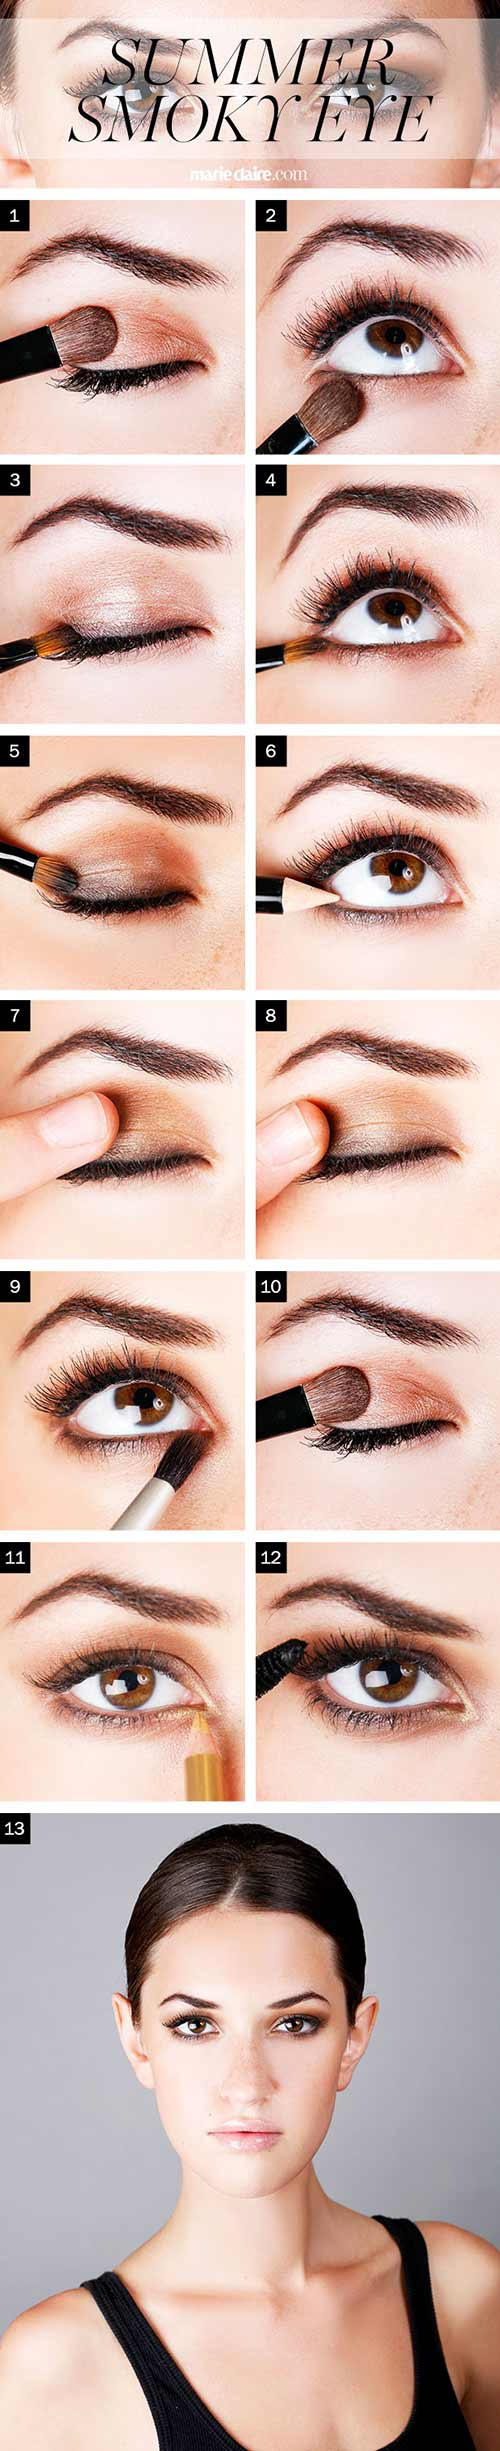 Eye Makeup For A Gold Dress How To Do Smokey Eye Makeup Top 10 Tutorial Pictures For 2019